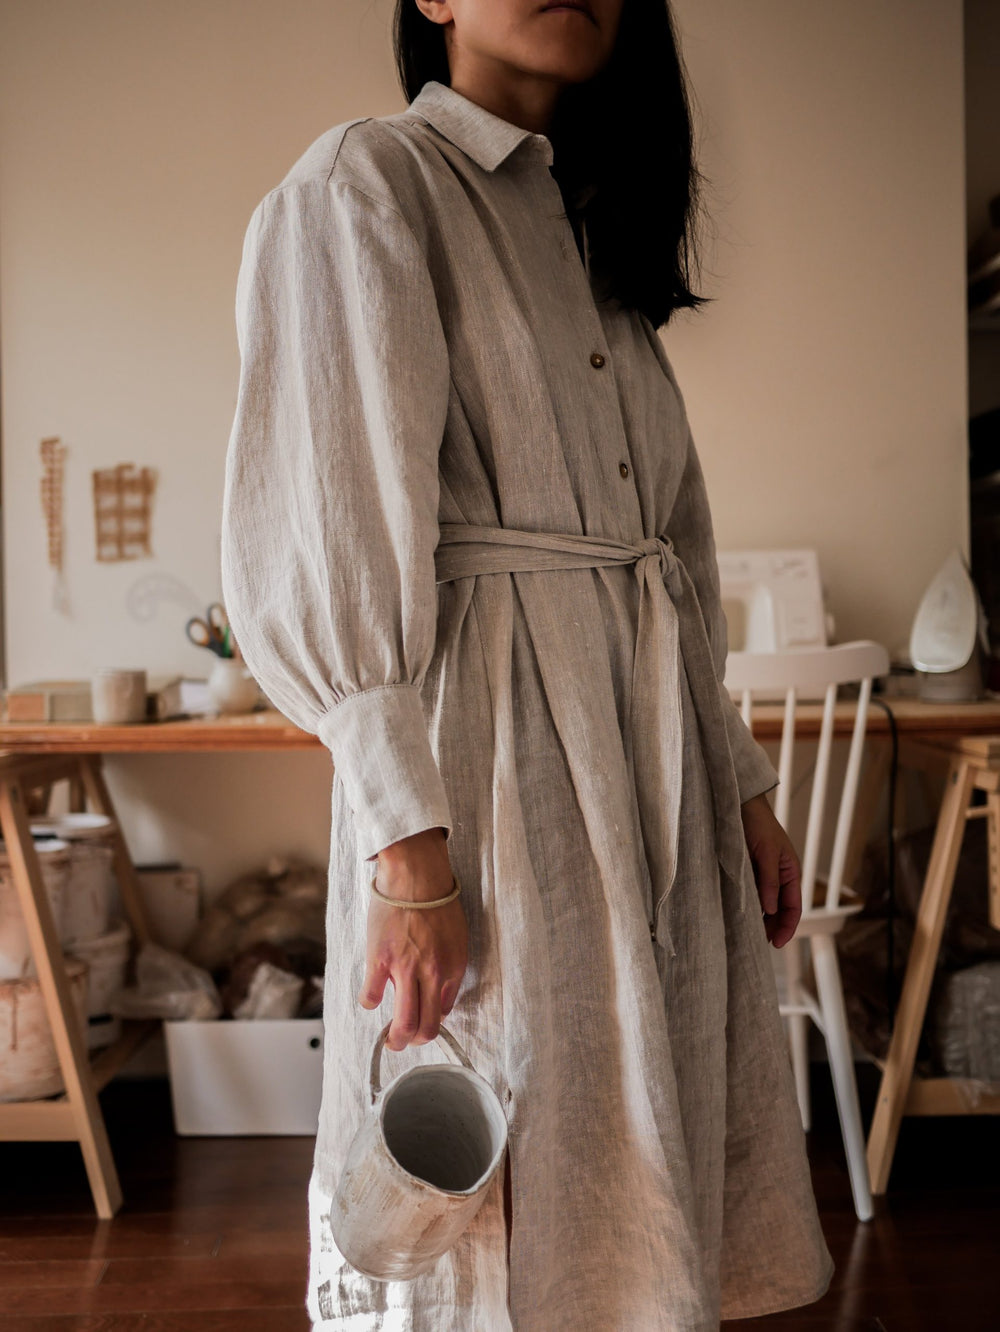 Woman wearing the Terra Dress sewing pattern from Vivian Shao Chen on The Fold Line. A shirt dress pattern made in cotton or linen fabric, featuring a relaxed fit, front button placket, collar stand and fall, slightly dropped sleeves gathered into cuffs, 